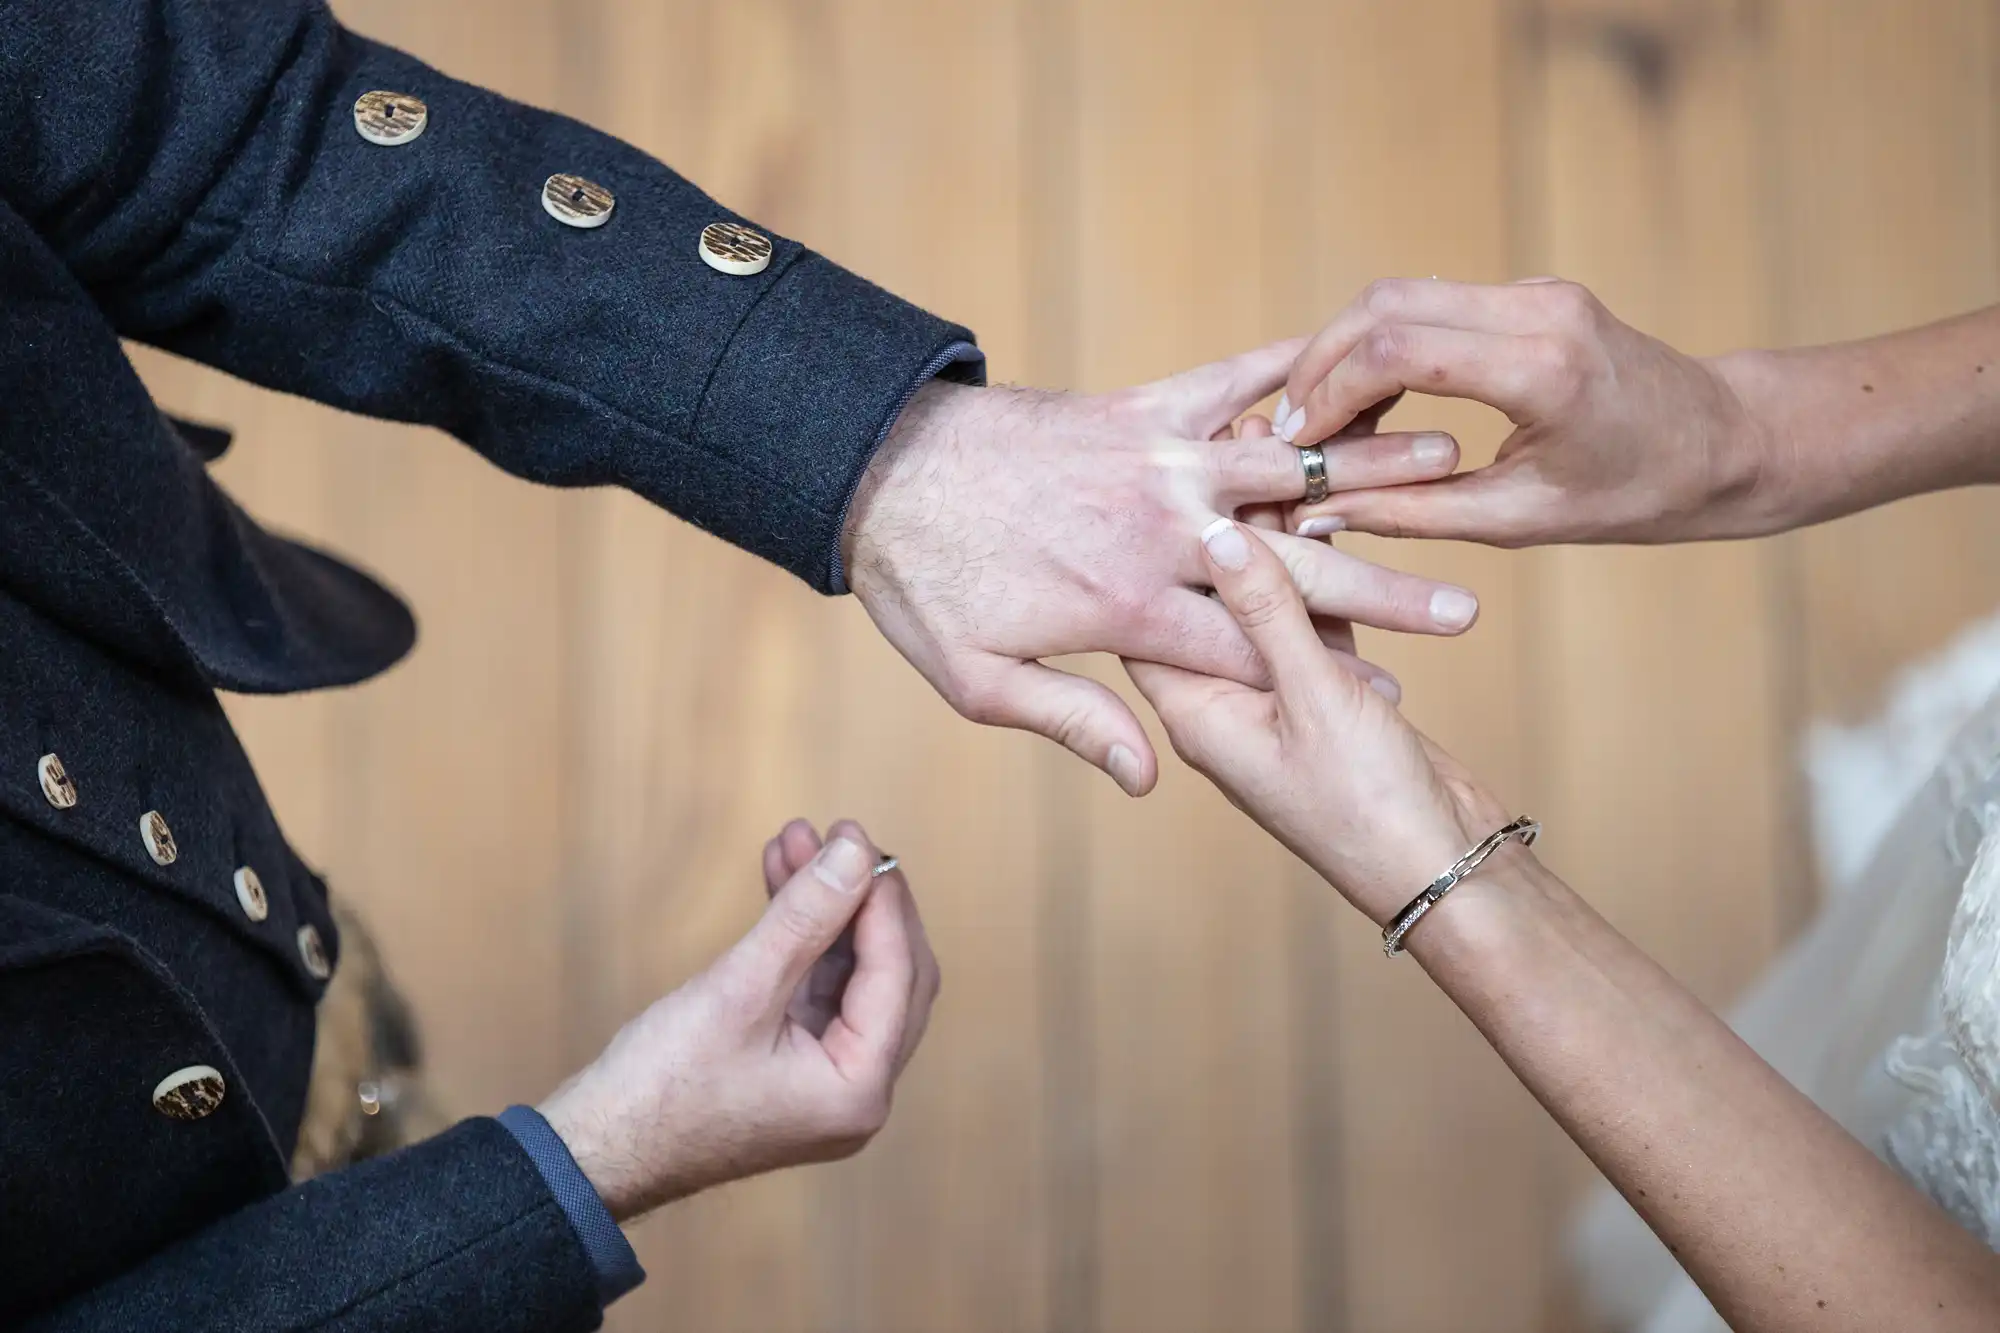 A close-up of a couple exchanging wedding rings. The person on the left is wearing a dark suit, while the person on the right is wearing a bracelet.